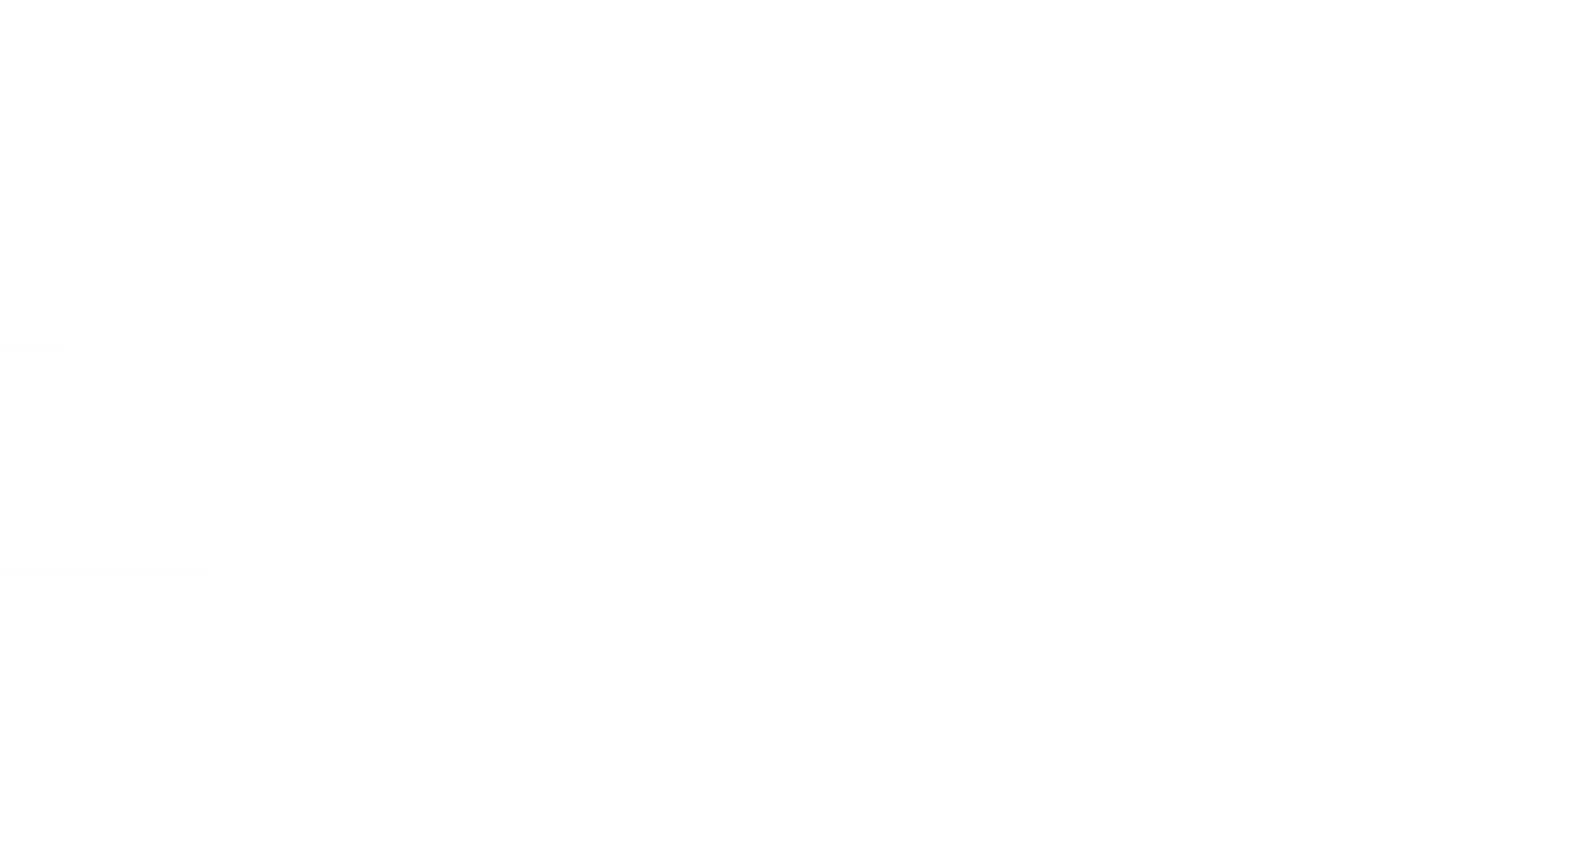 IDEAL to REAL